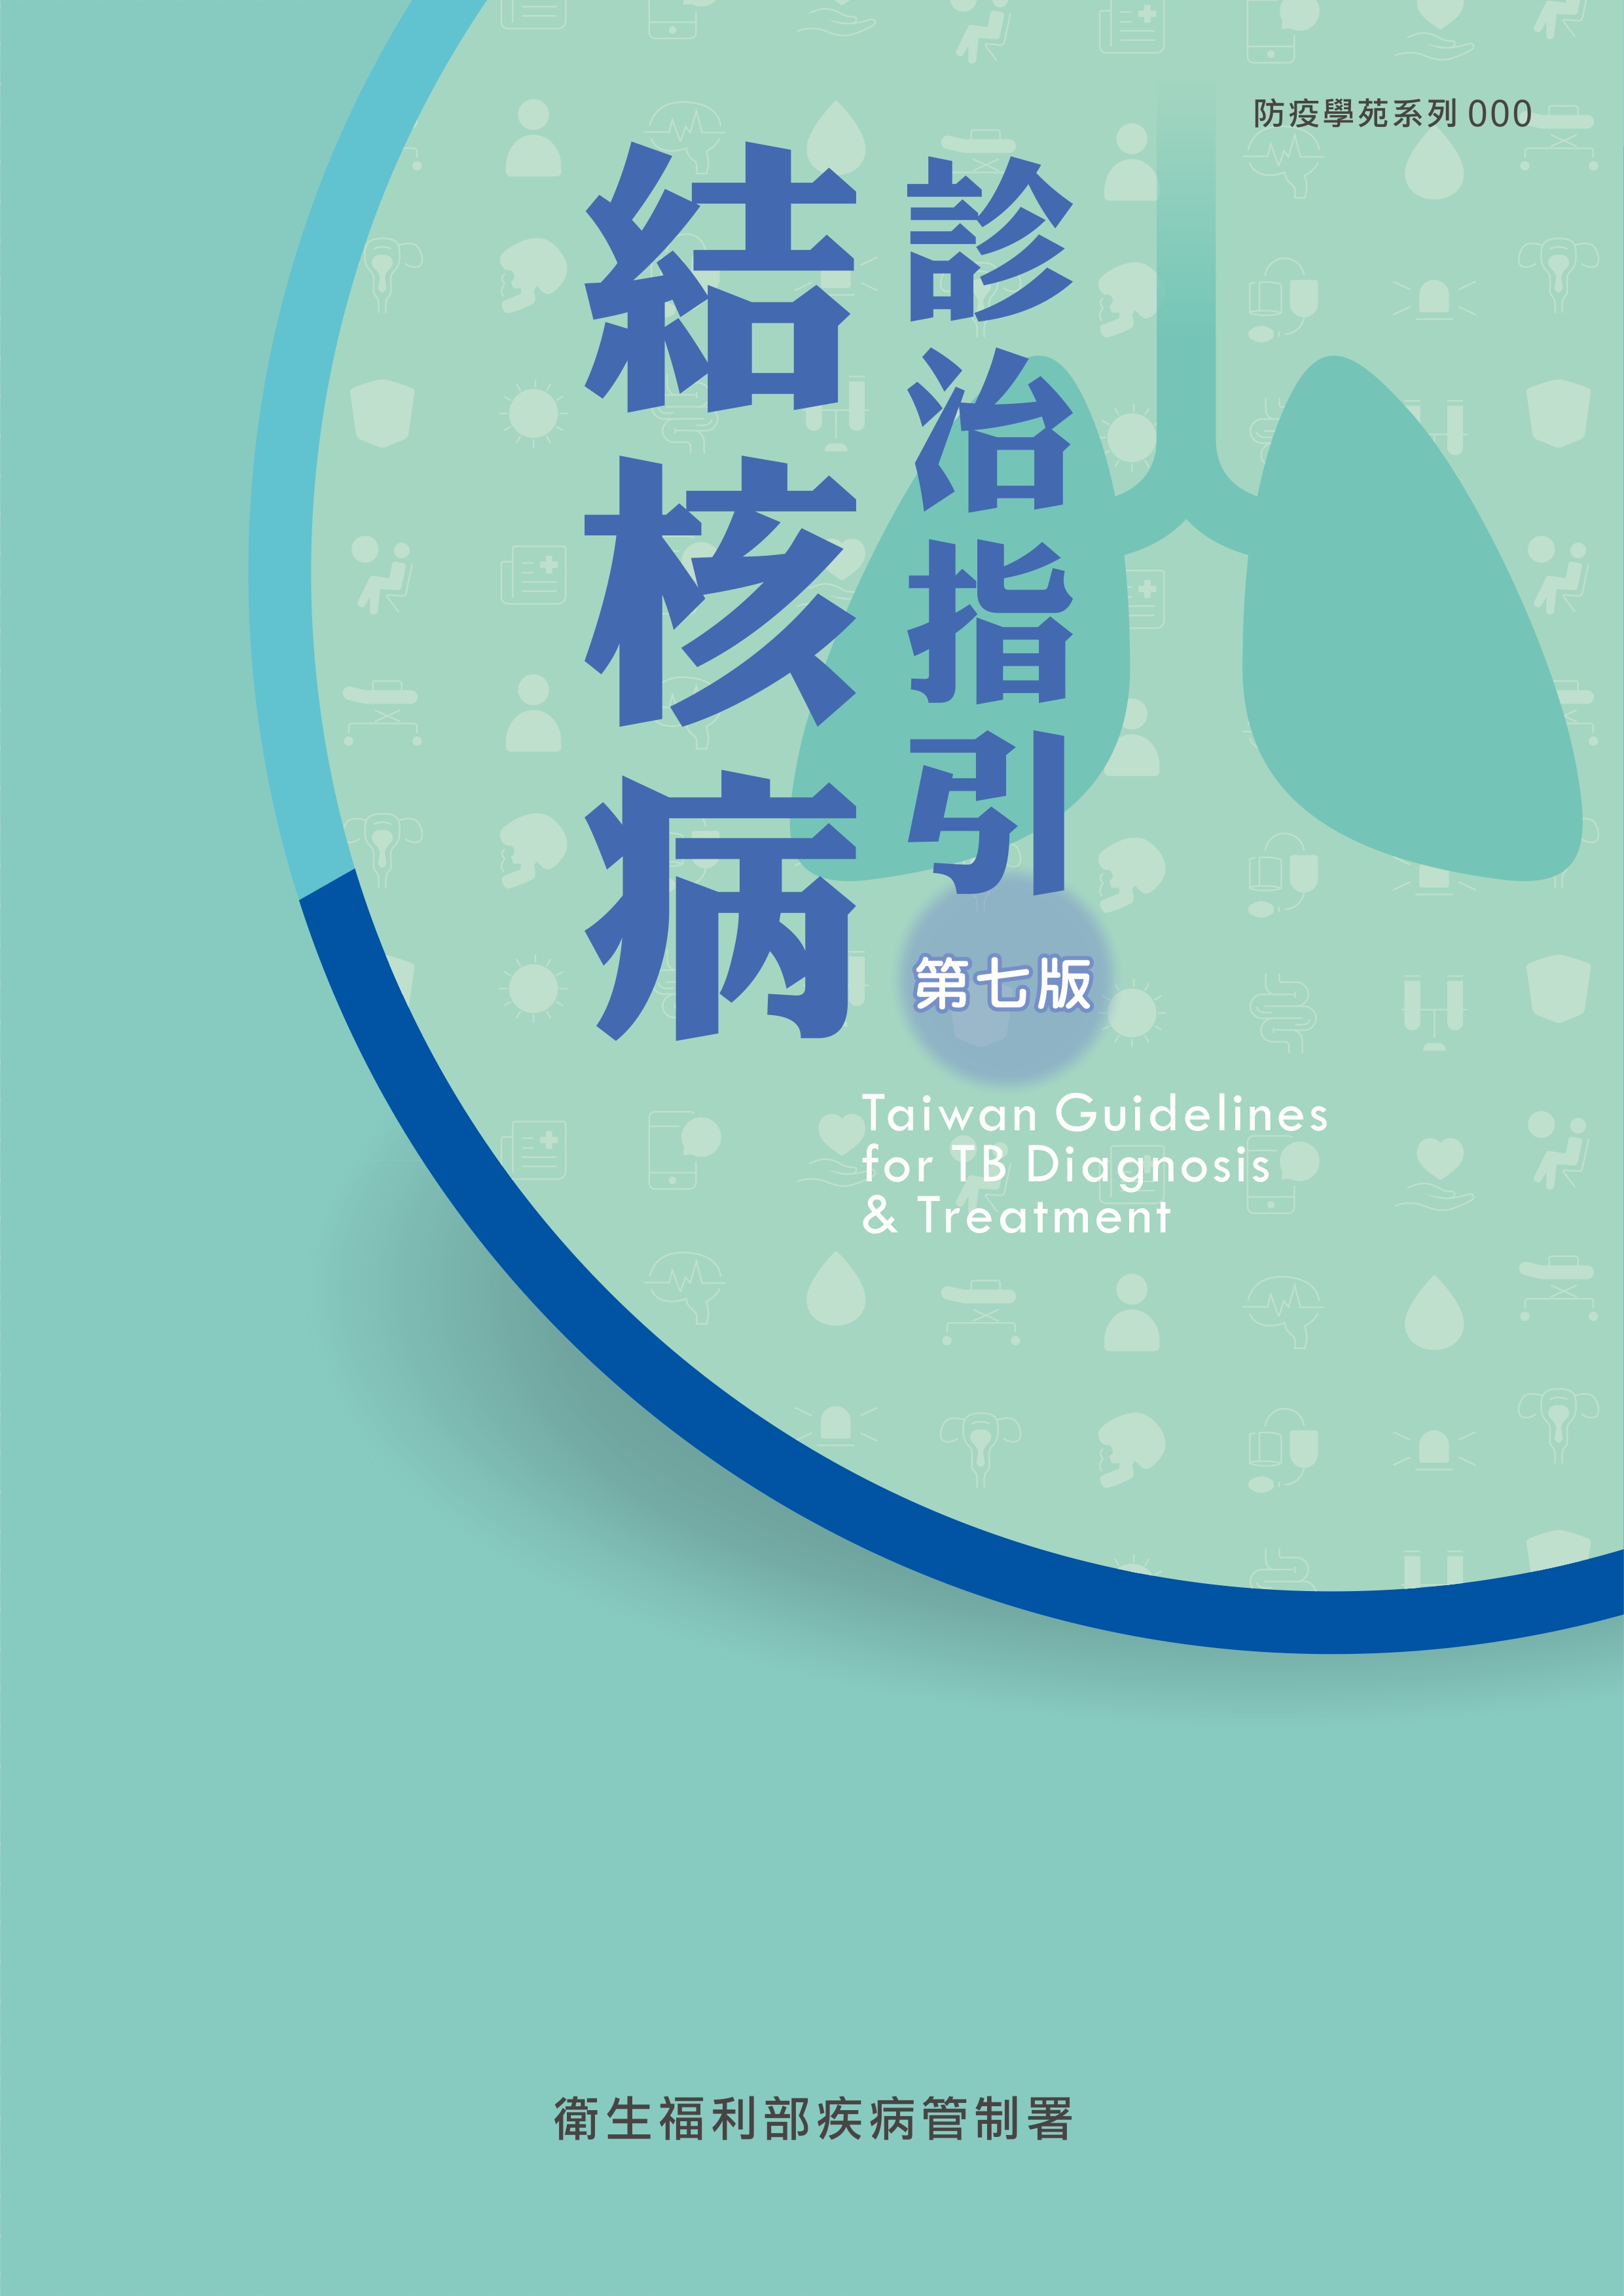 Taiwan Guidelines for TB Diagnosis & Treatment